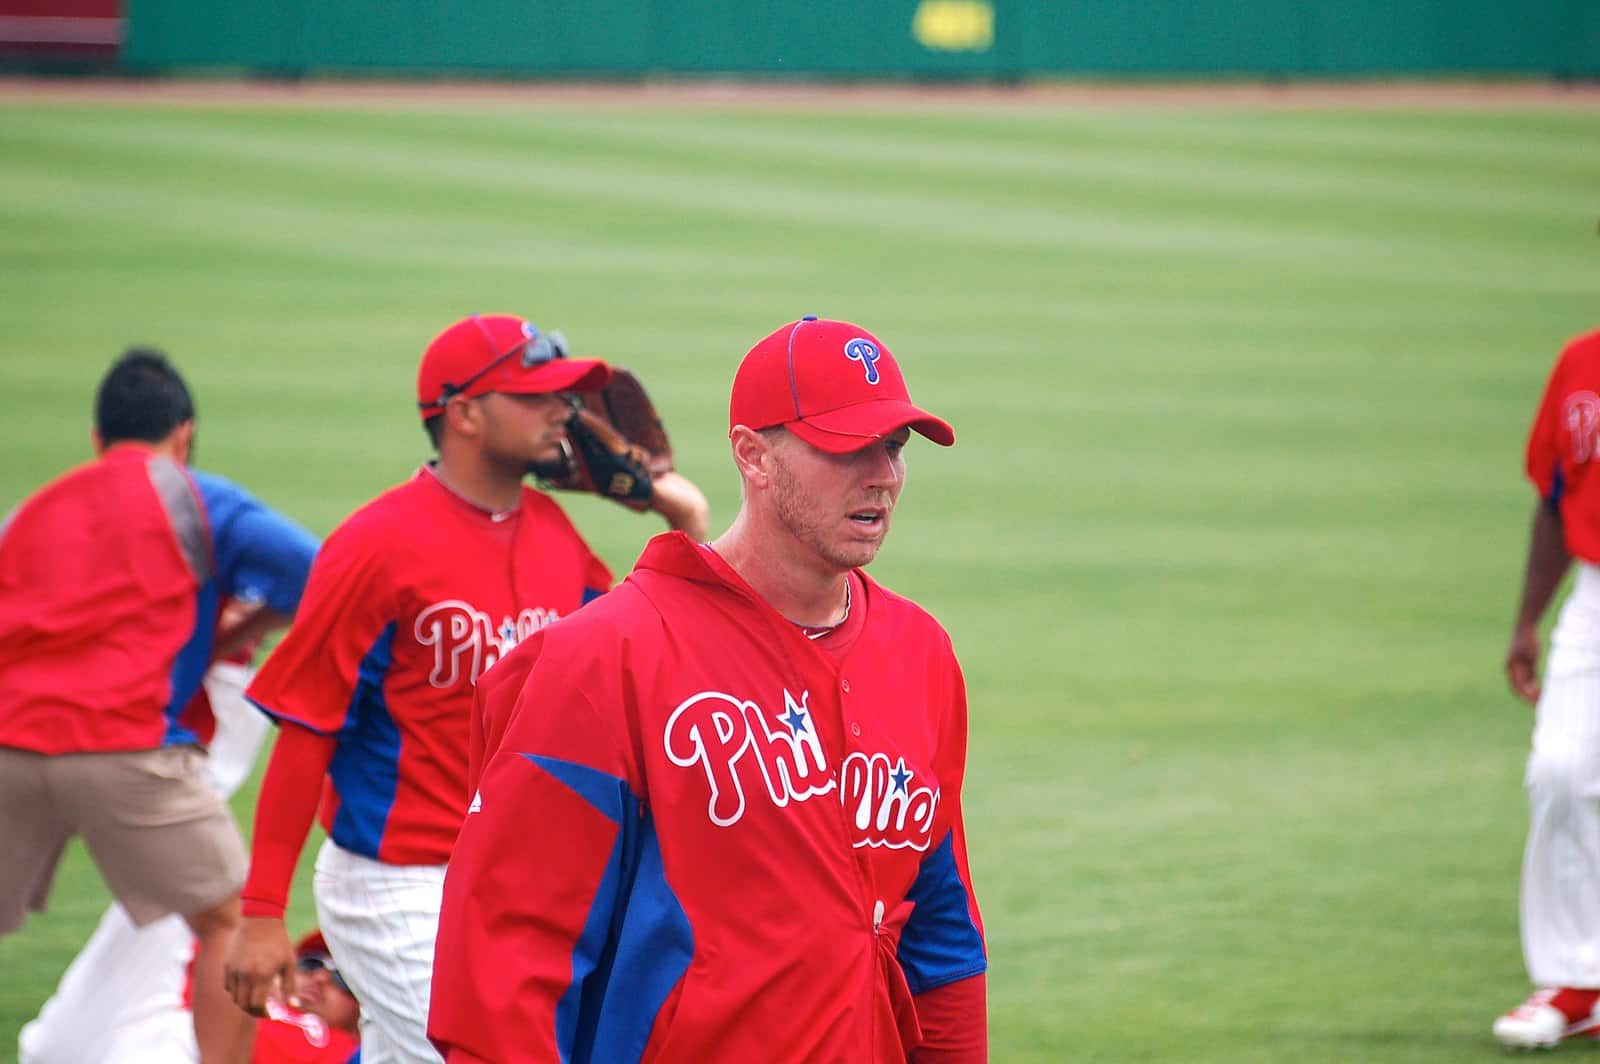 Roy Halladay will represent neither Blue Jays or Phillies on HOF plaque   Phillies Nation - Your source for Philadelphia Phillies news, opinion,  history, rumors, events, and other fun stuff.